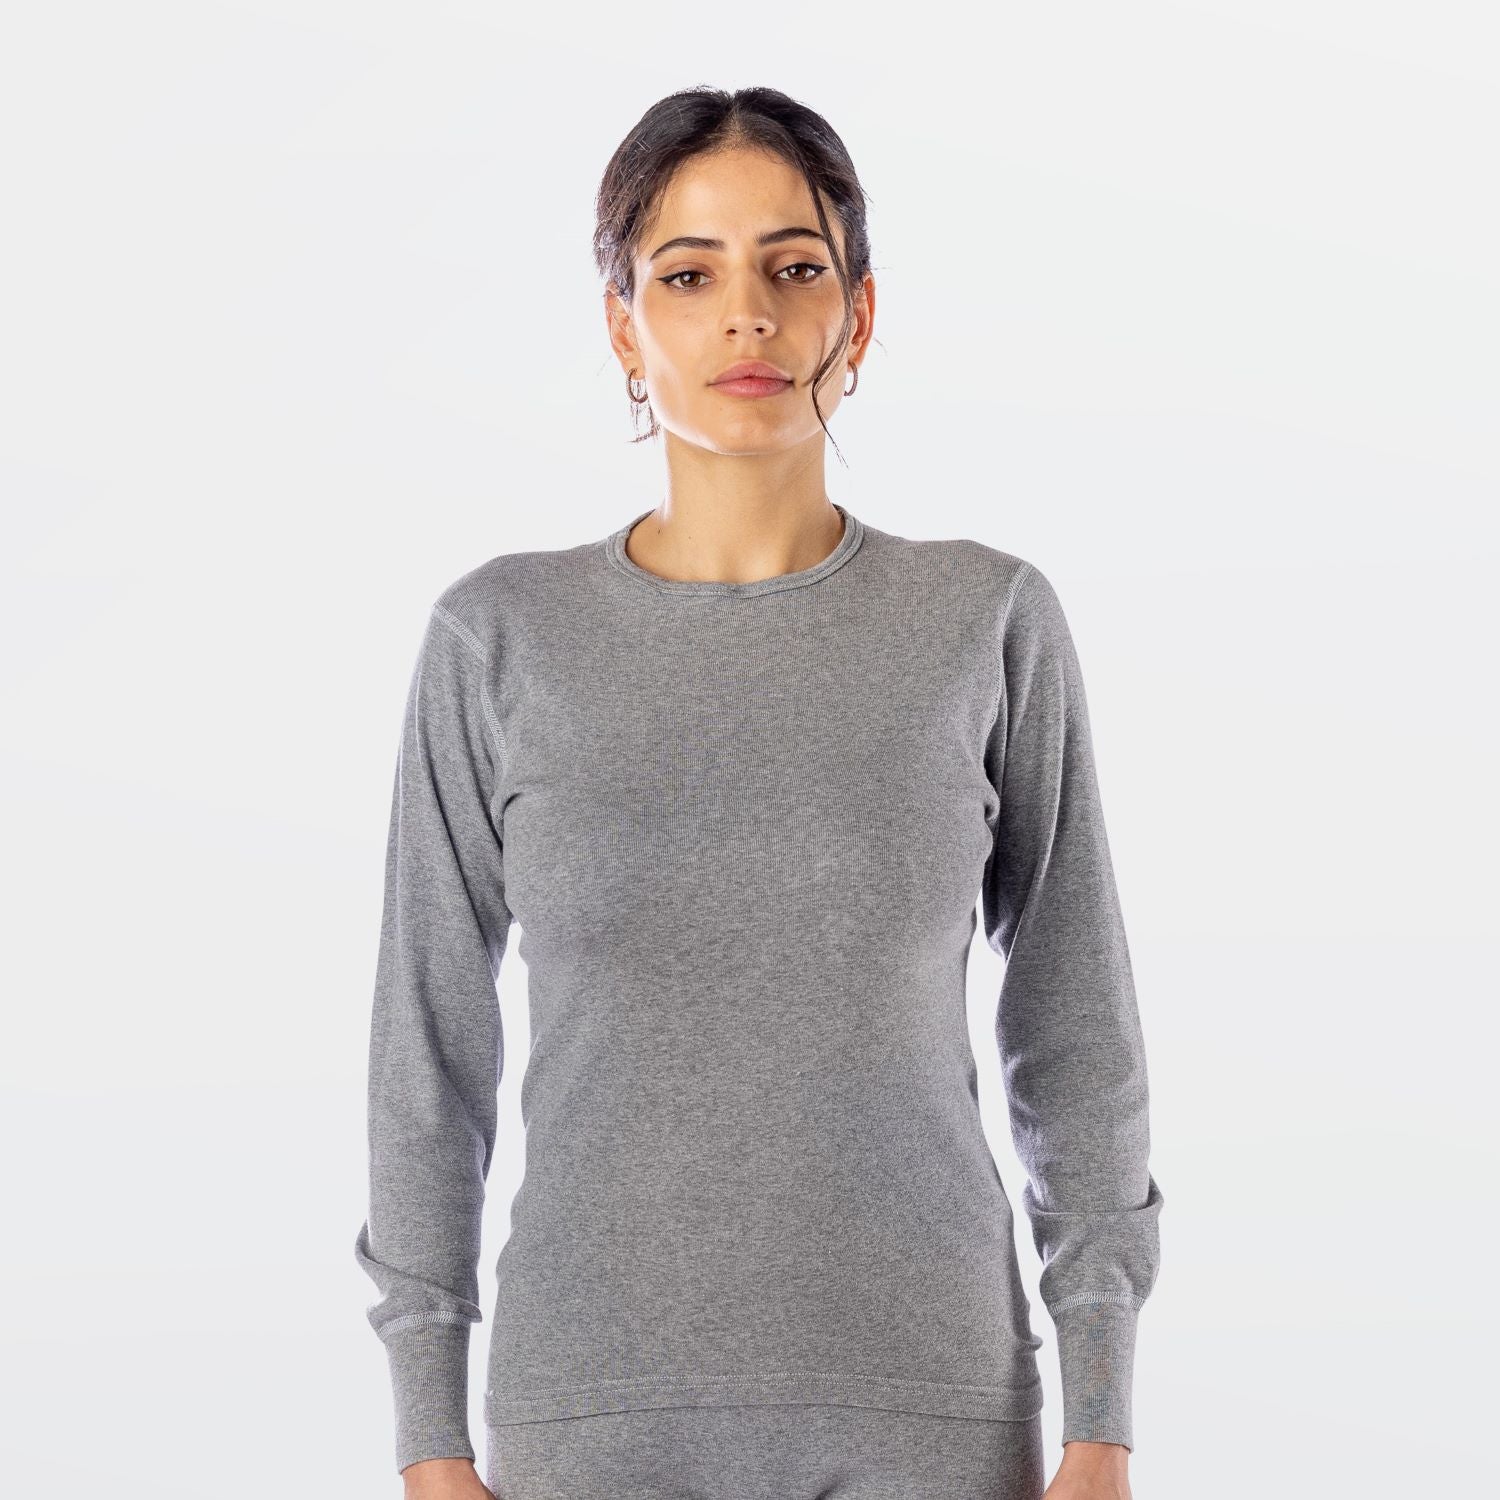 Women's Base Layer Top Chill Chasers Collection (Cotton Rib